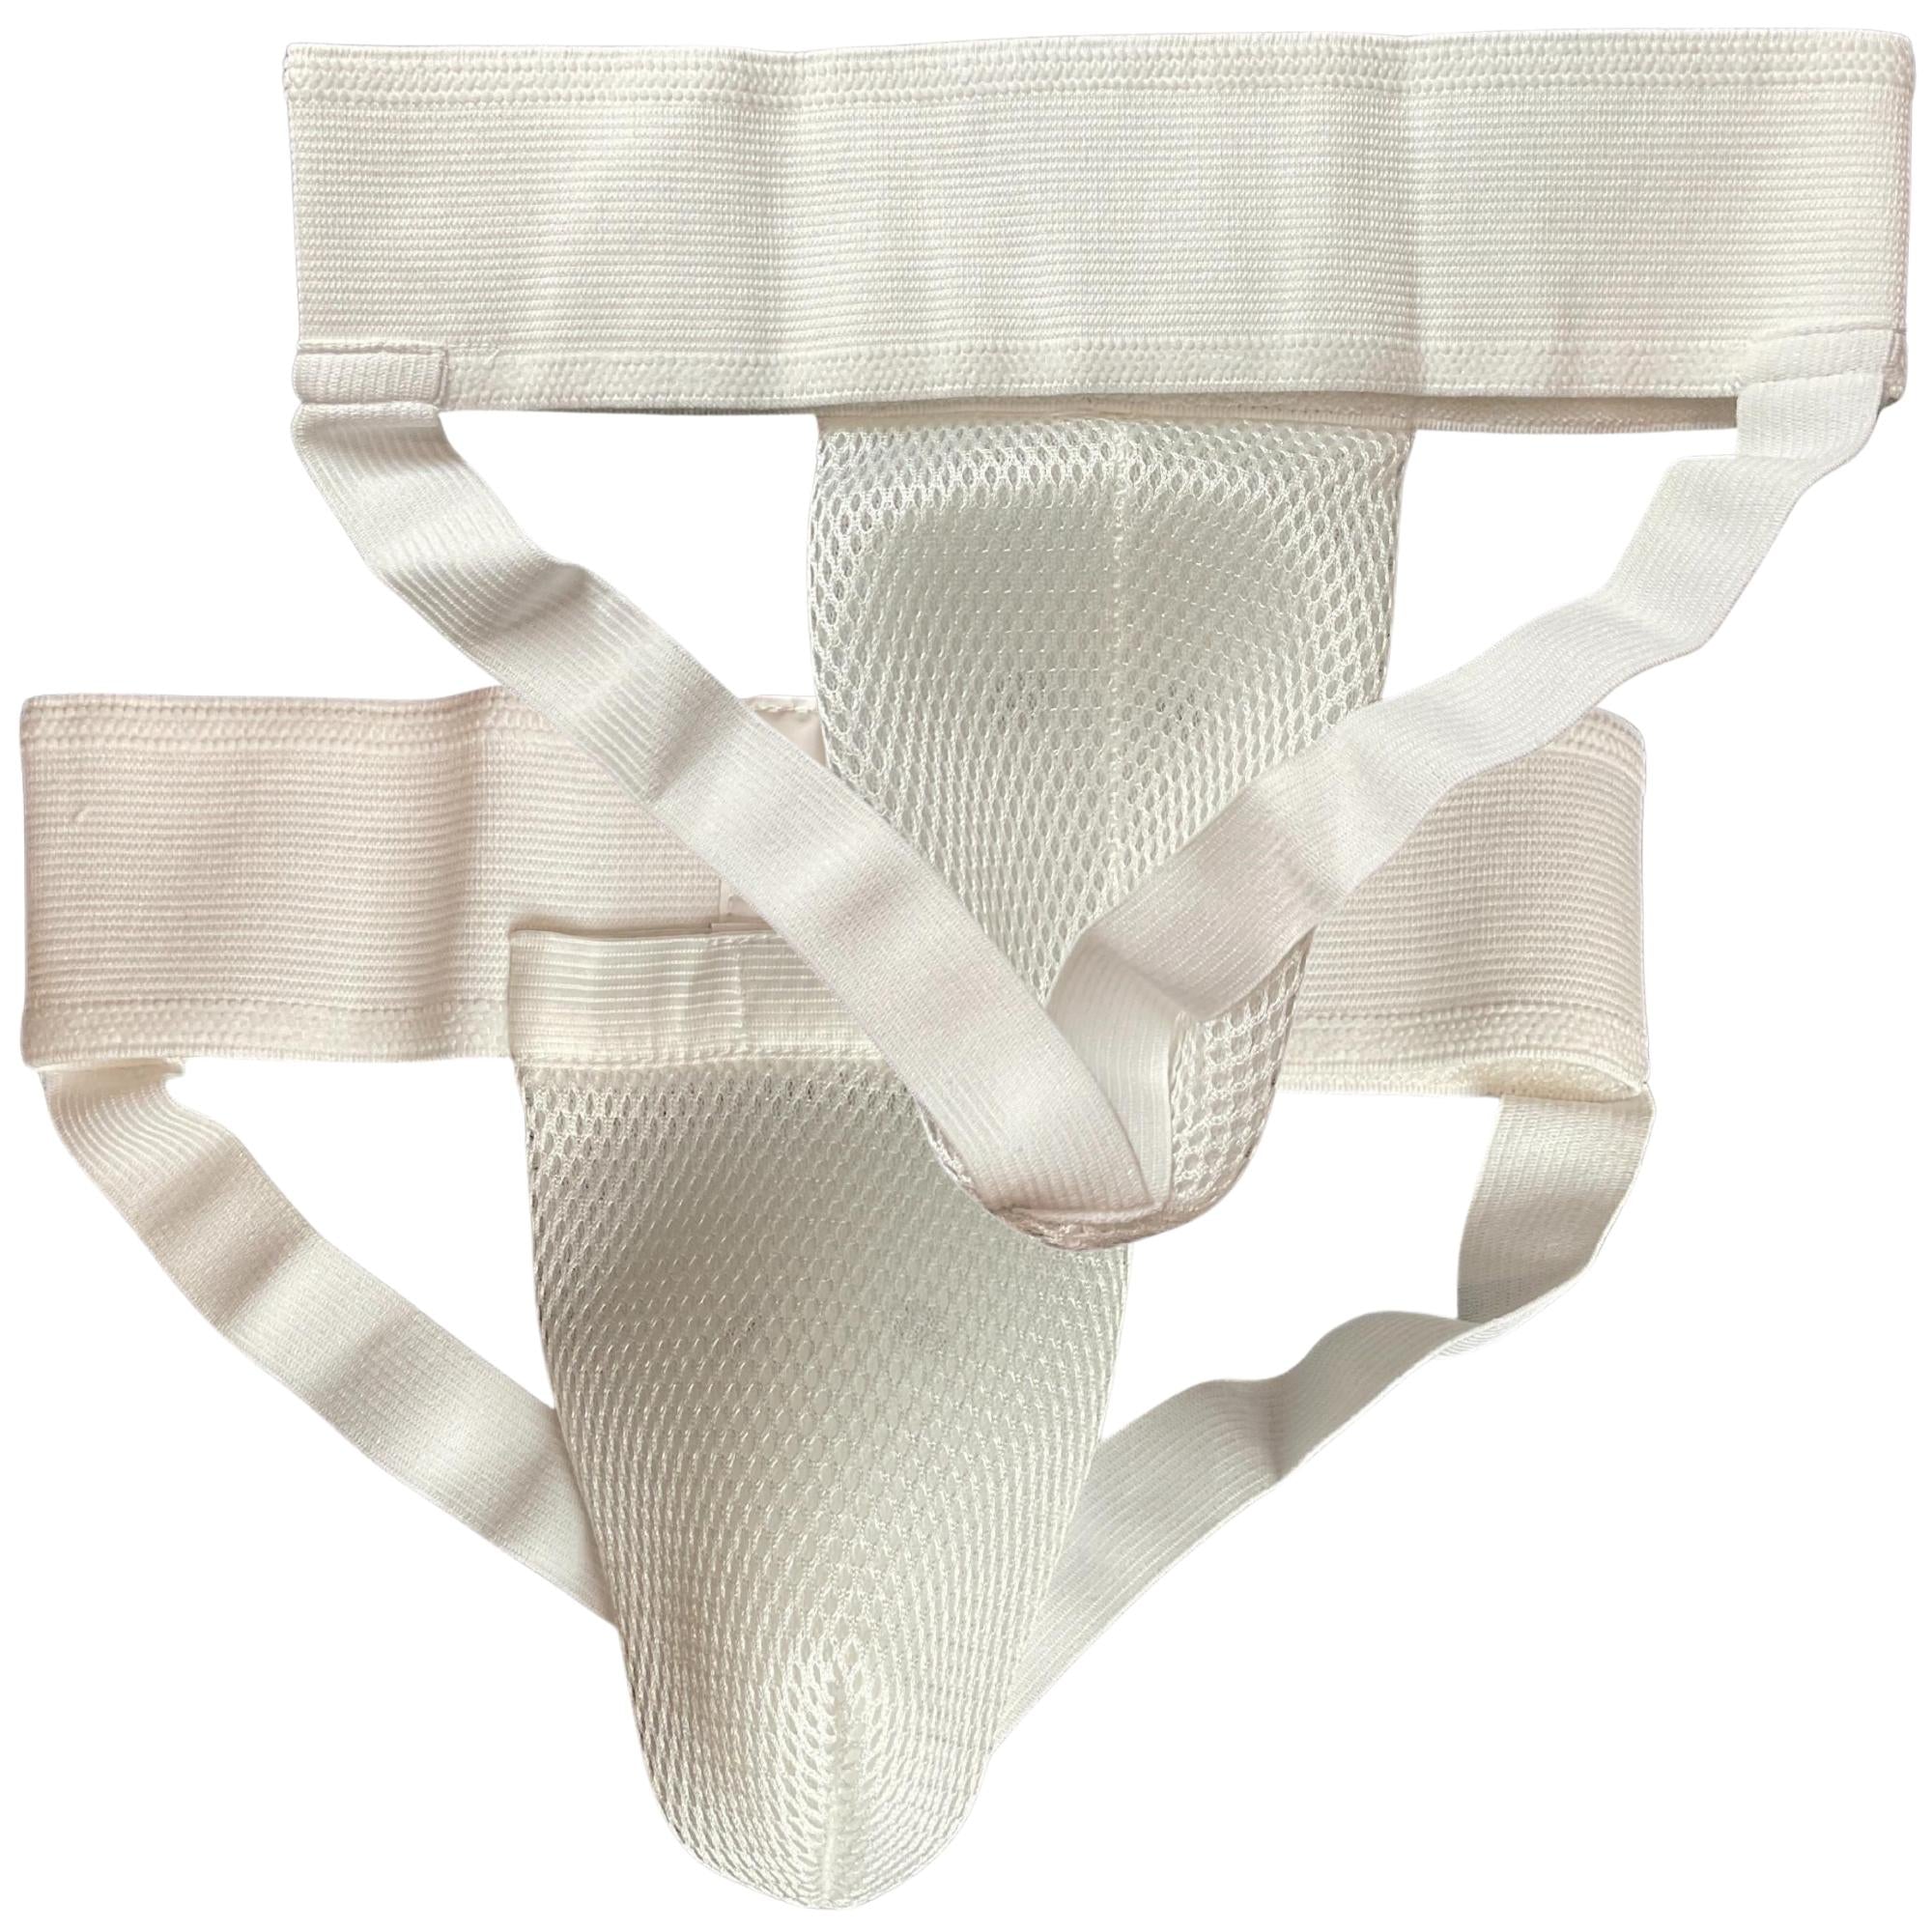 Zee Sports Cricket Jock Strap With Abdominal Cup